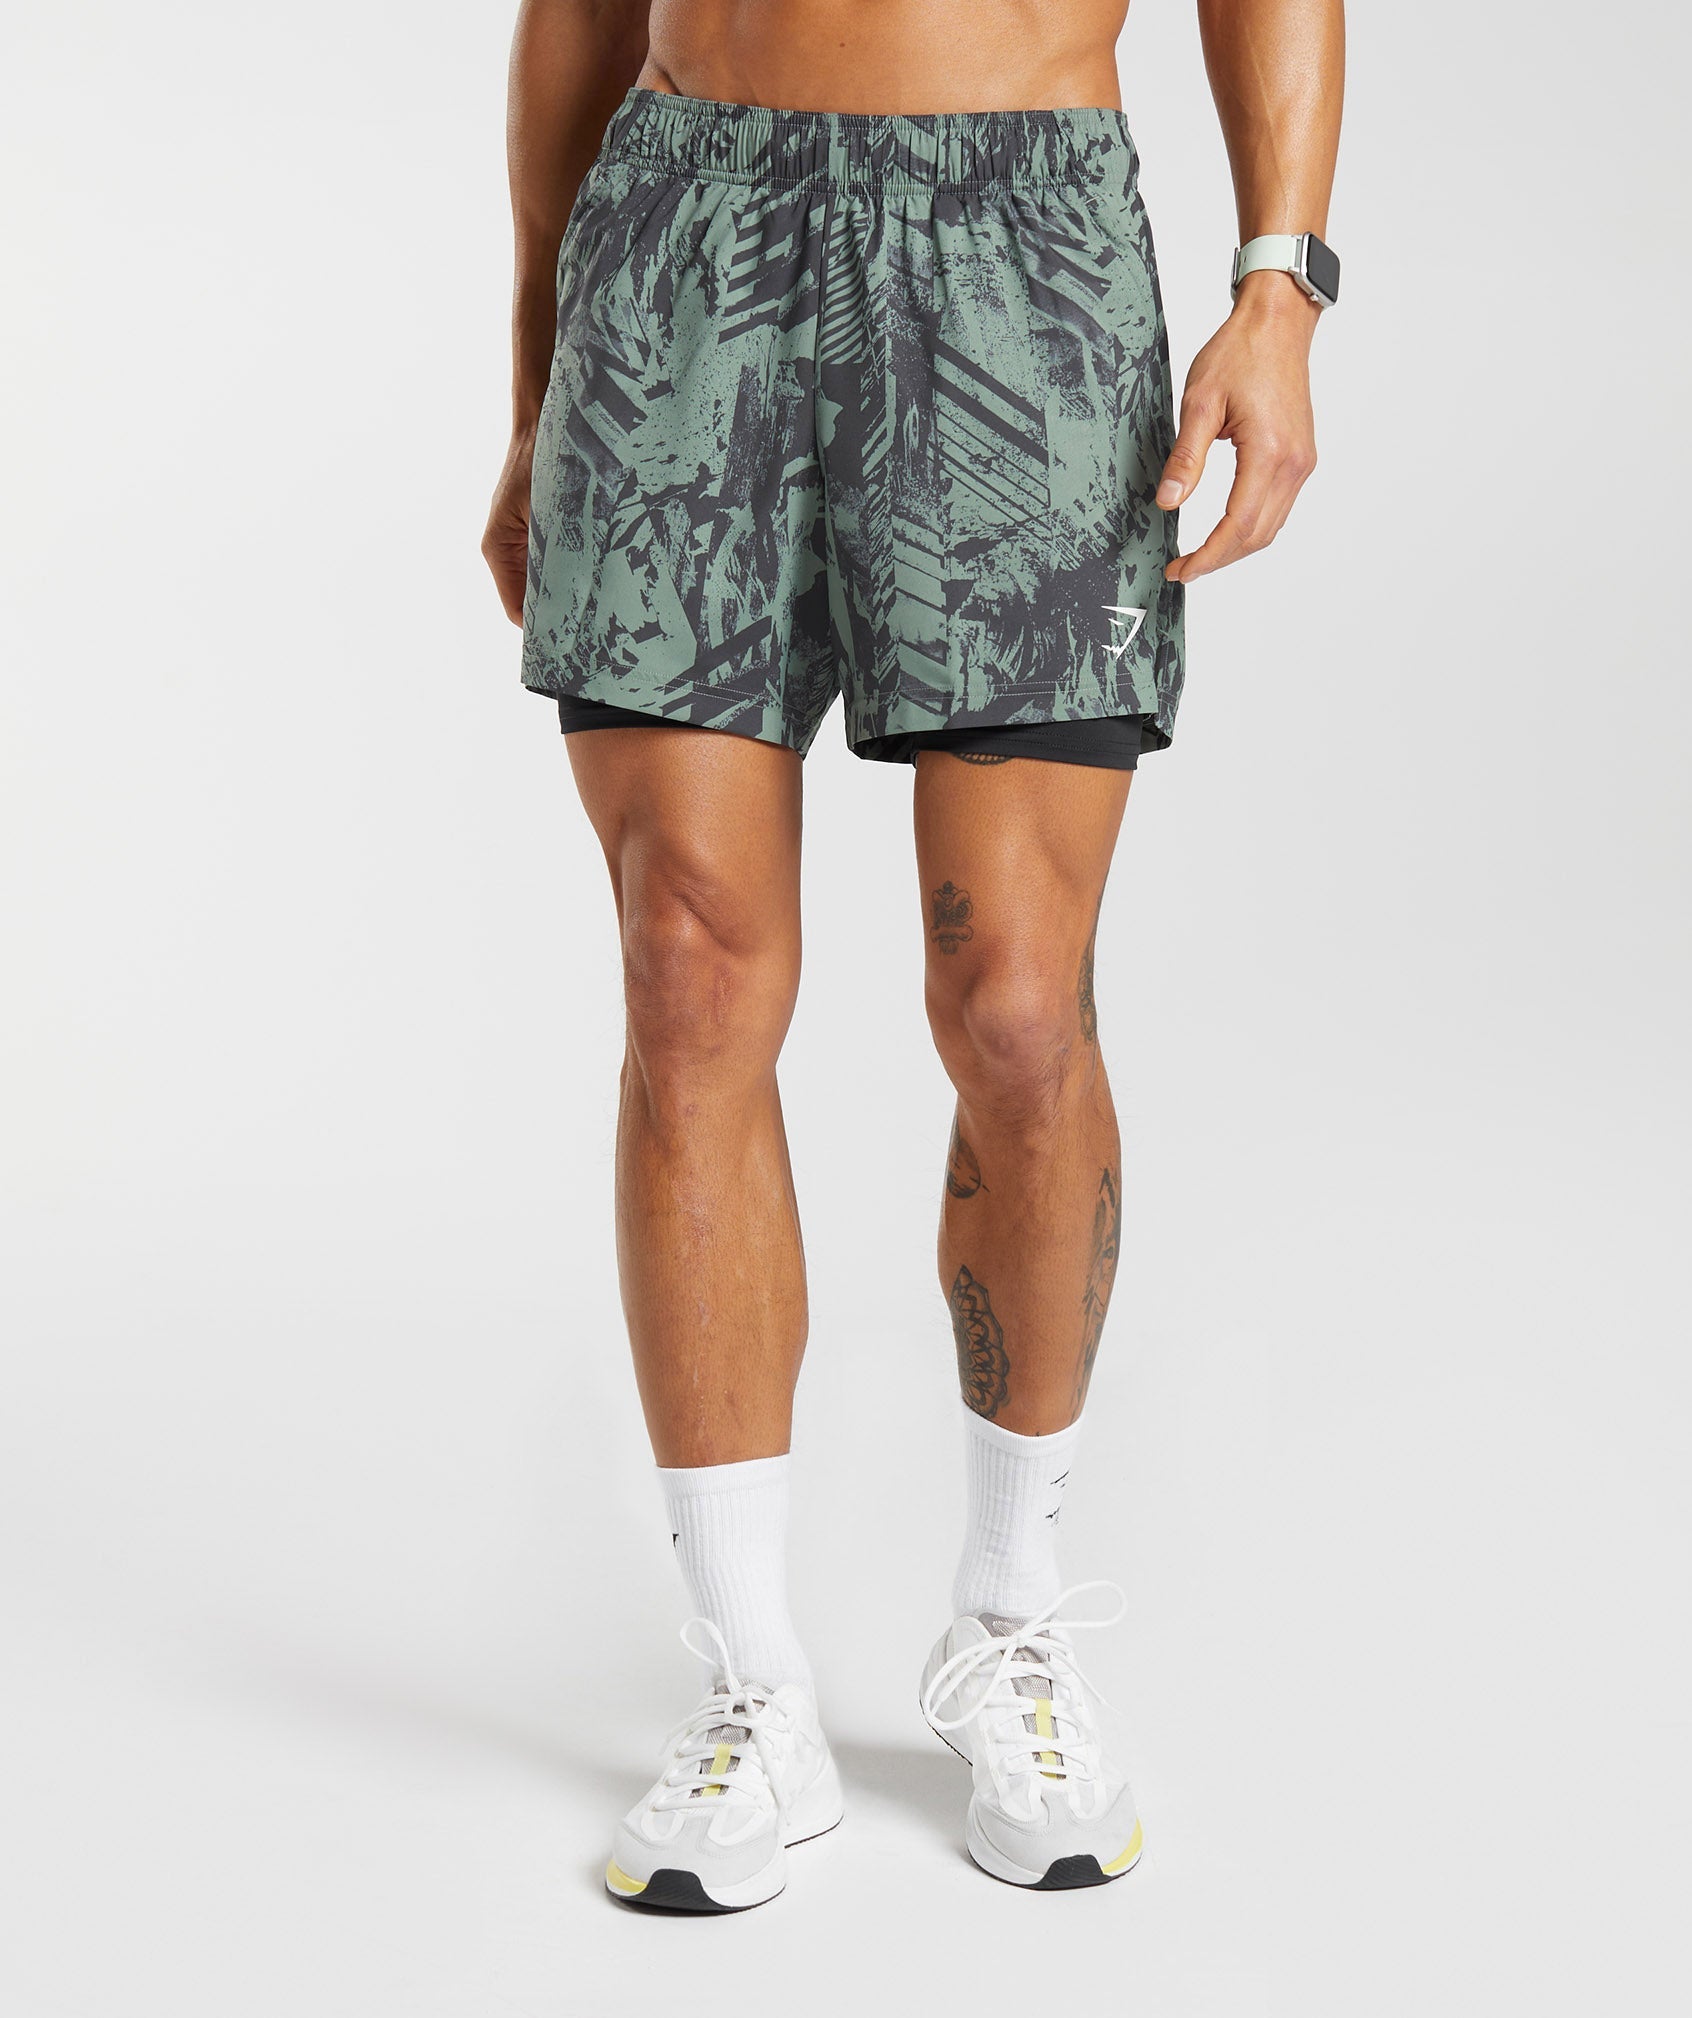 Sport 5" 2 in 1 Shorts in Willow Green/Black